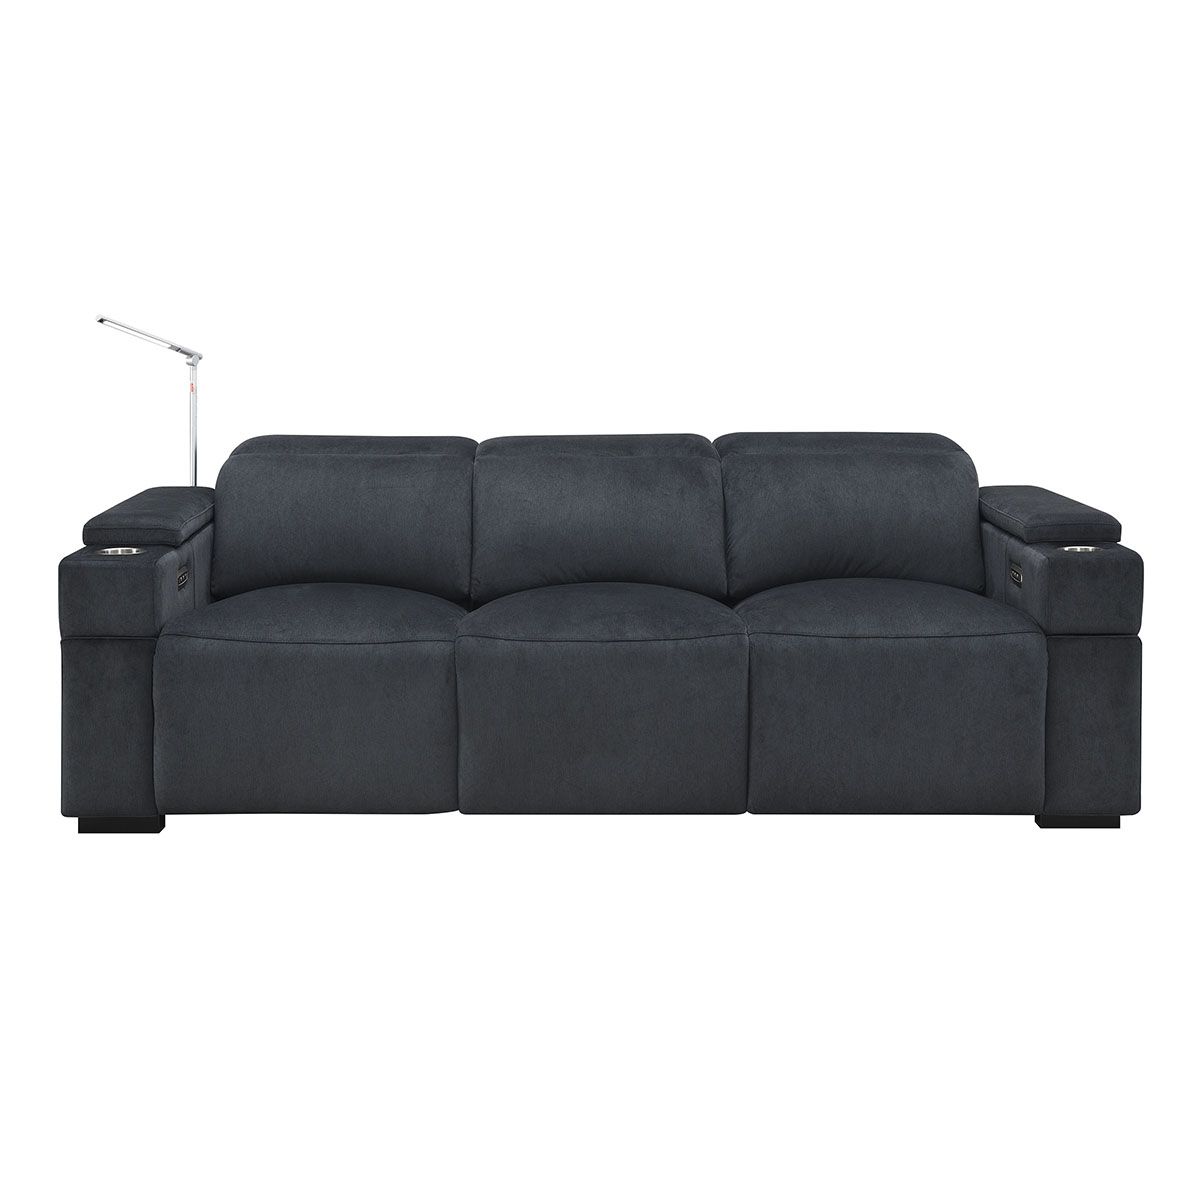 RowOne Calveri - Charcoal Patterned Polyester Microfiber Fabric - 3 Chair Sofa - front view